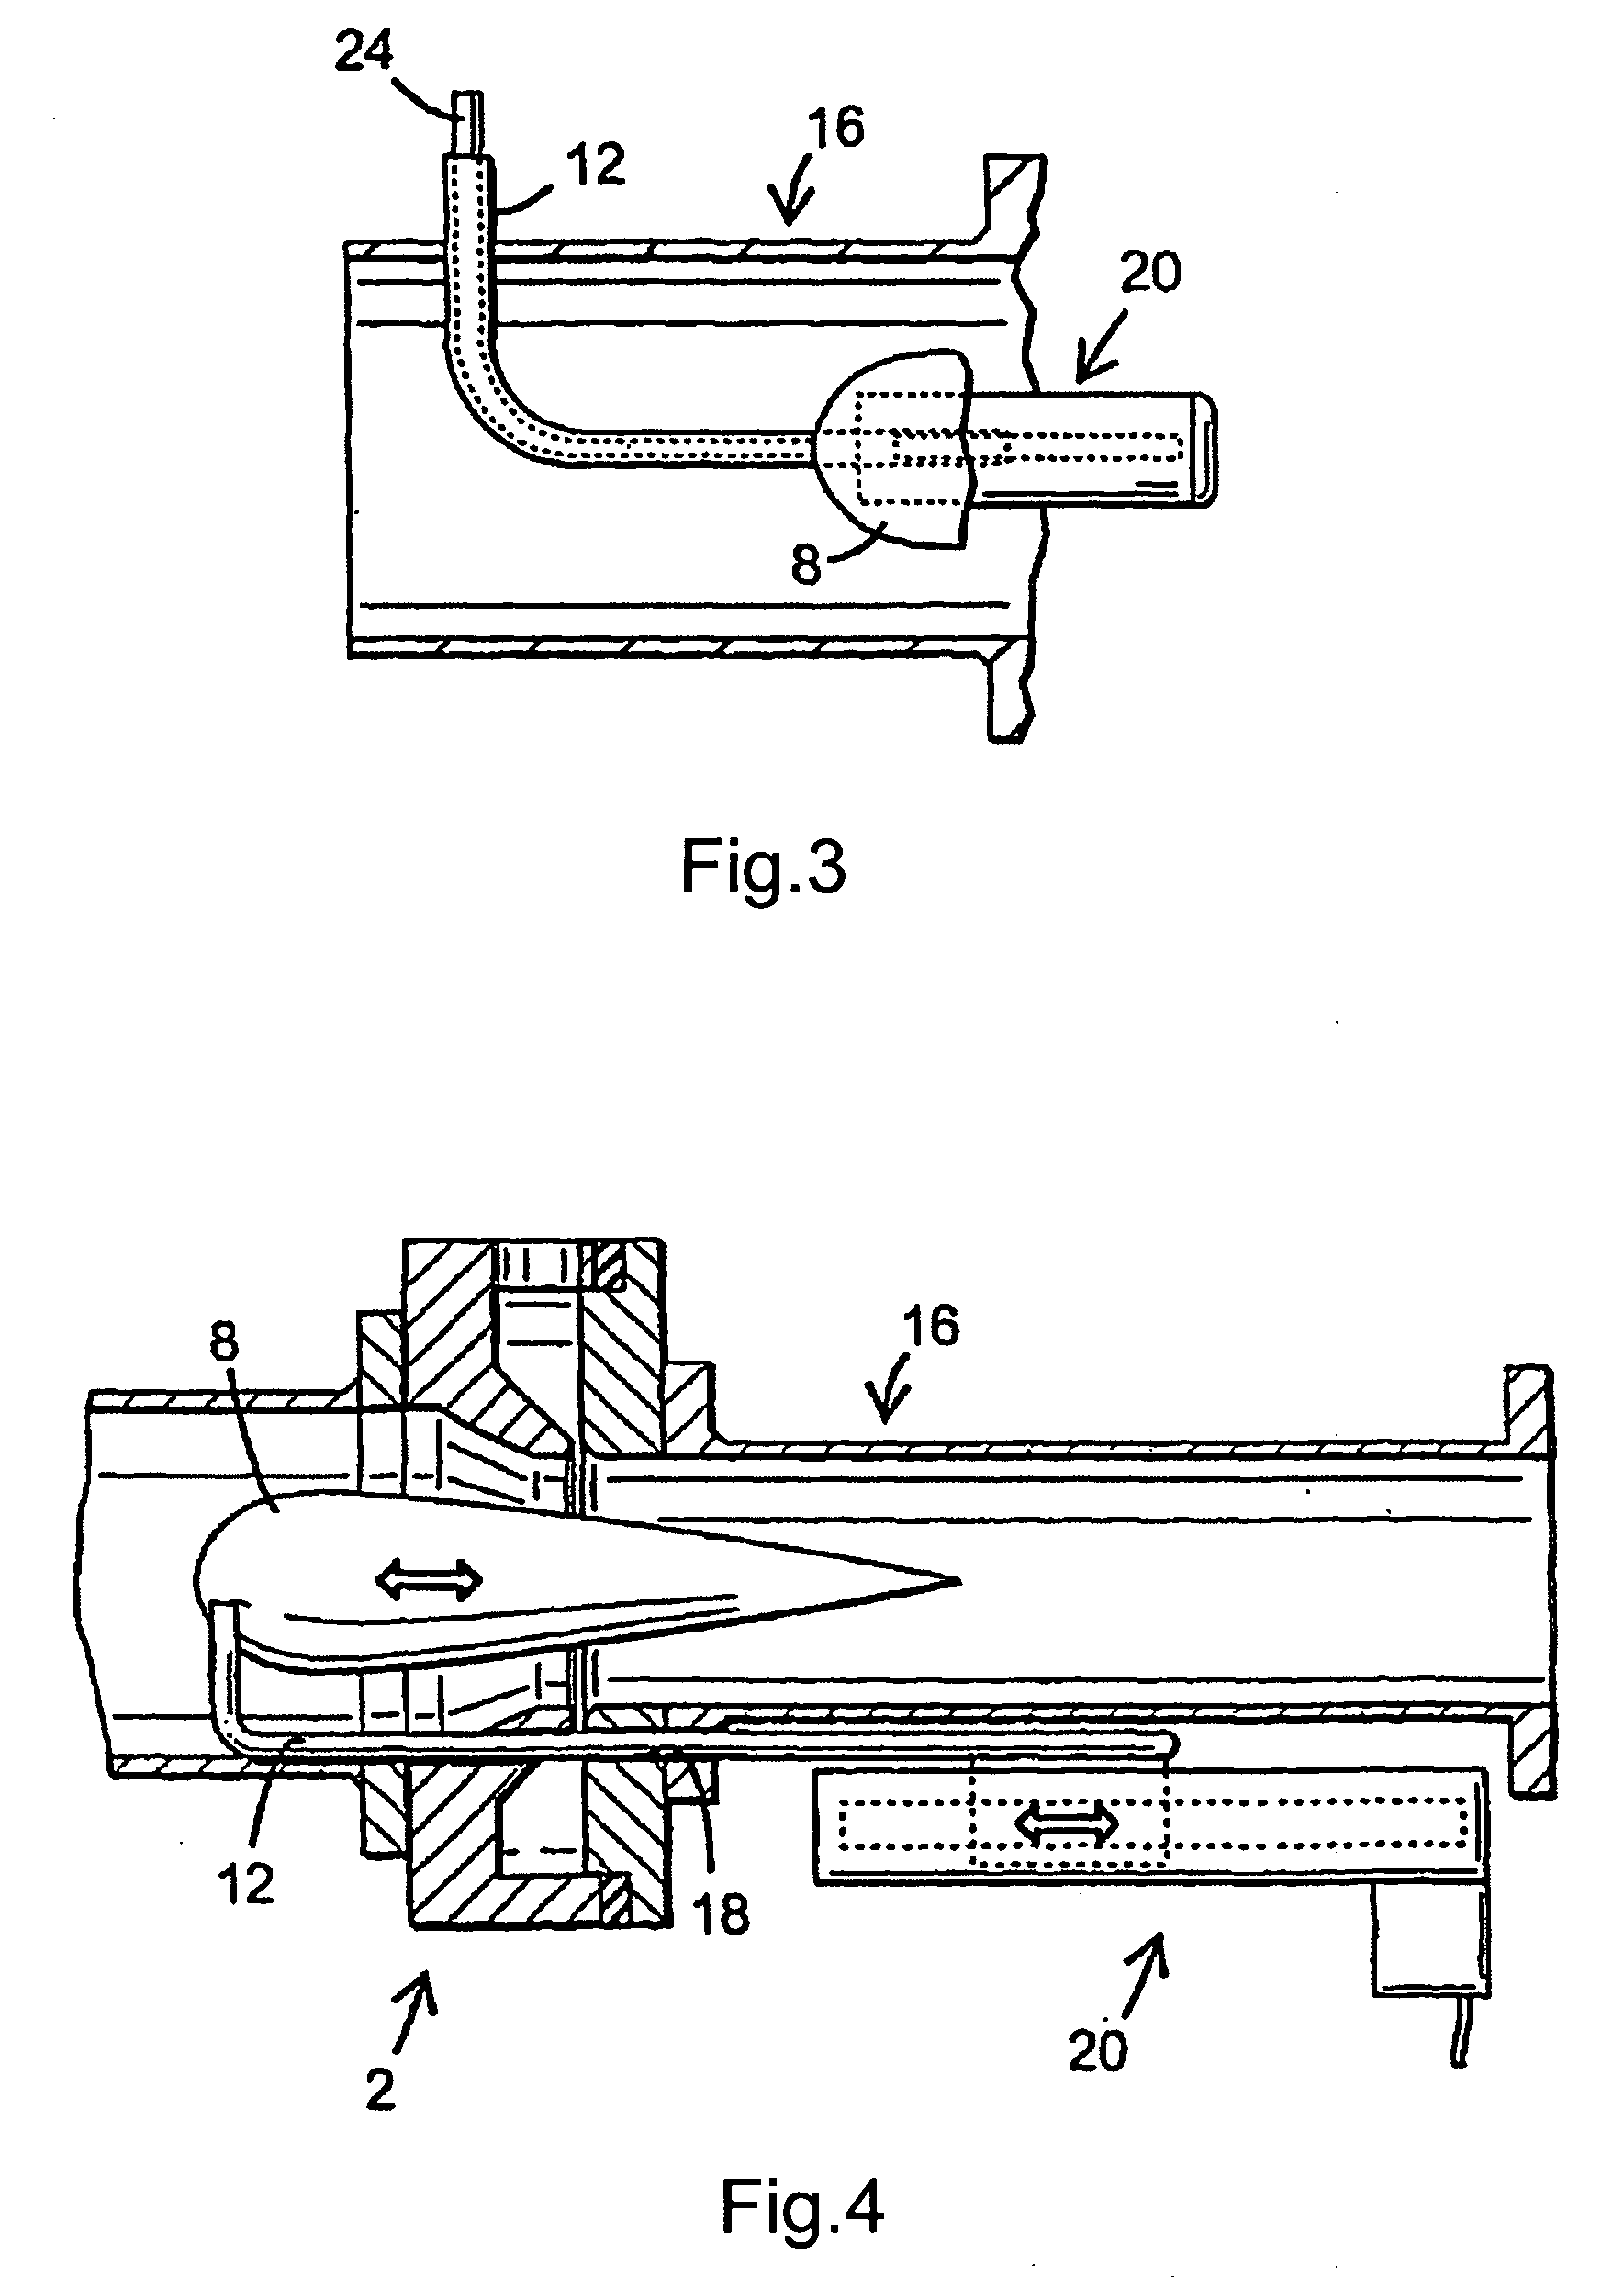 Arrangement for mixing a first and second gas flow with downstream control